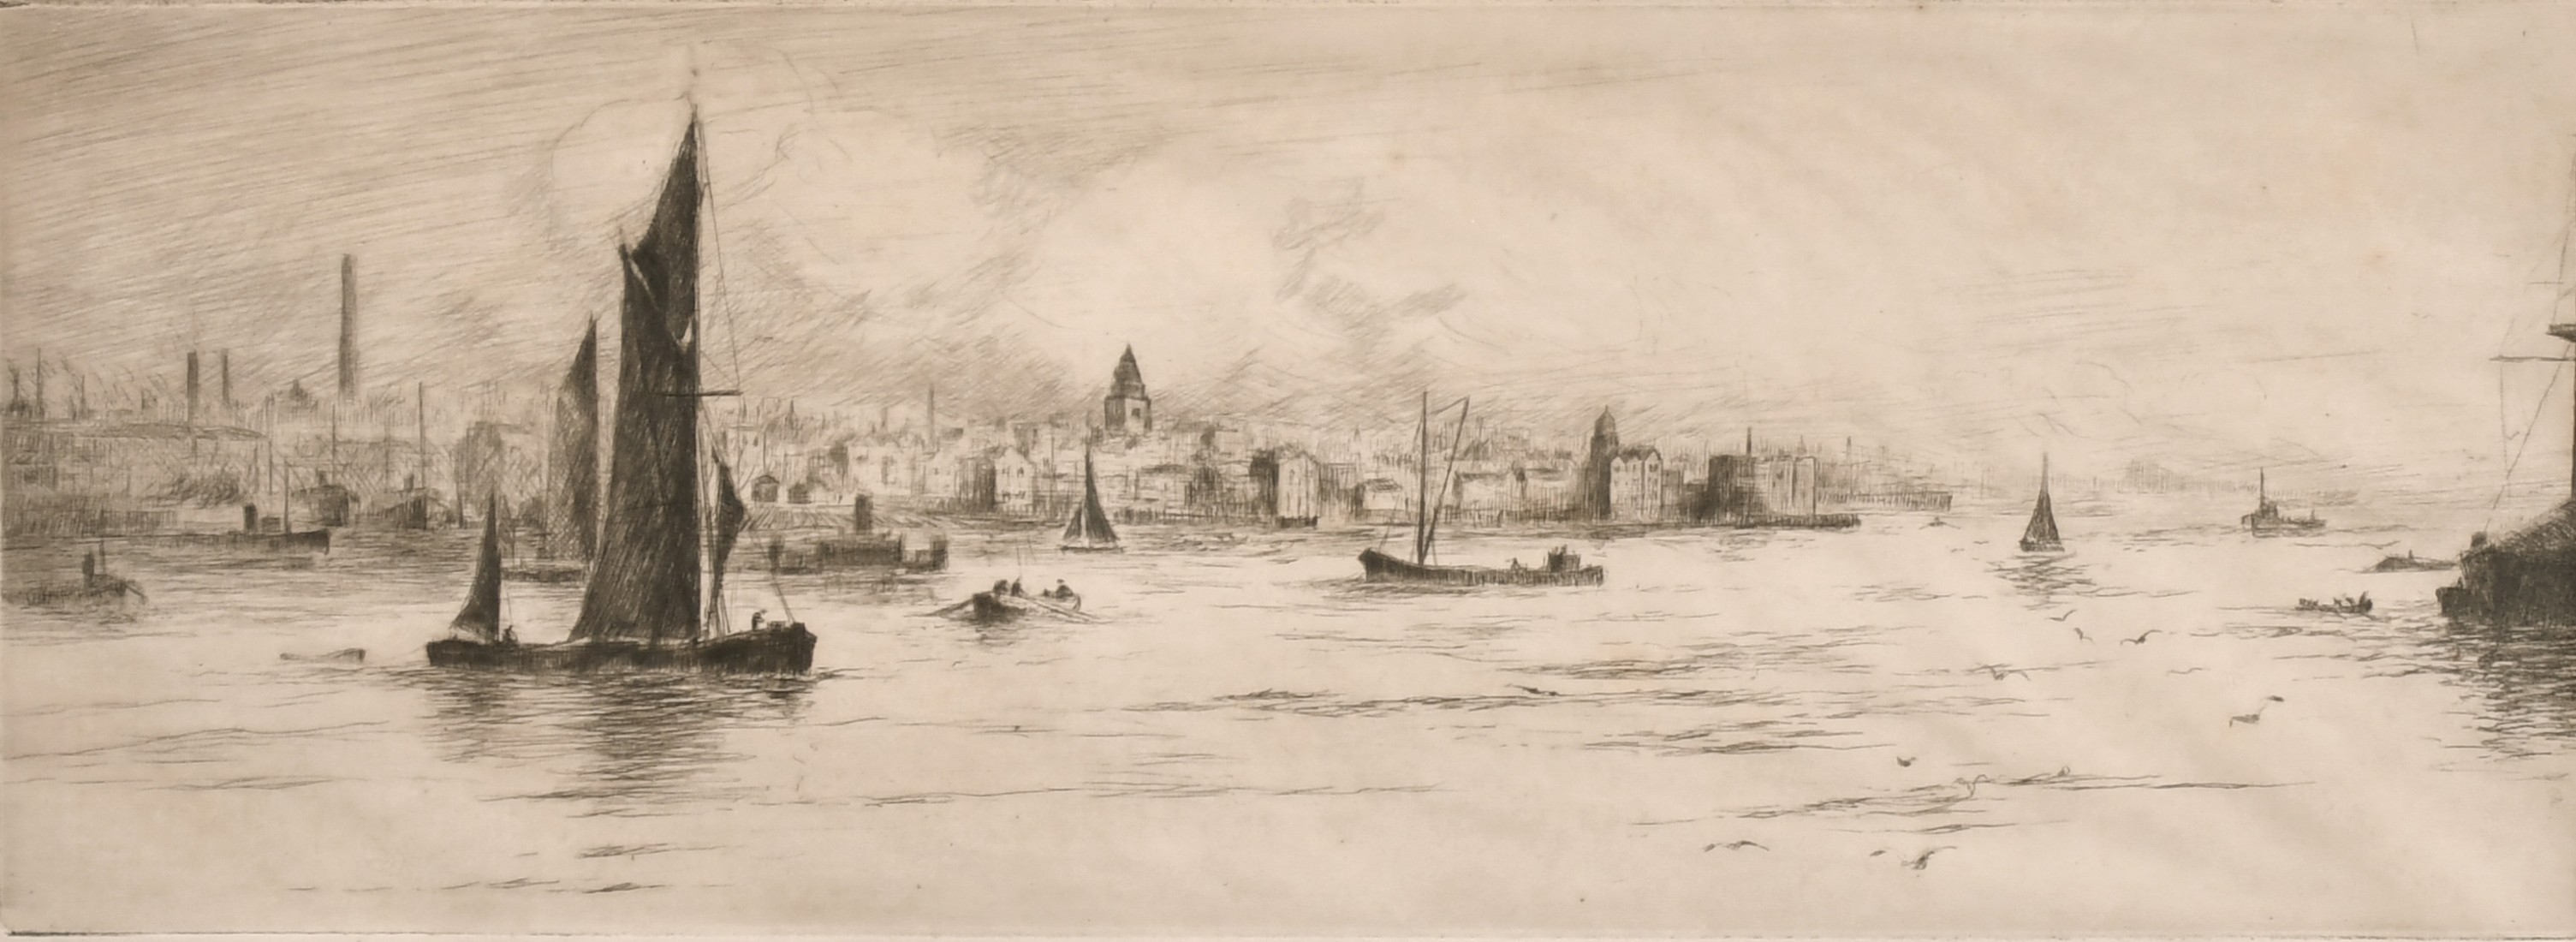 Frank Harding (19th /20th century) 'Waterloo Bridge', Etching, signed and inscribed in pencil, 6"